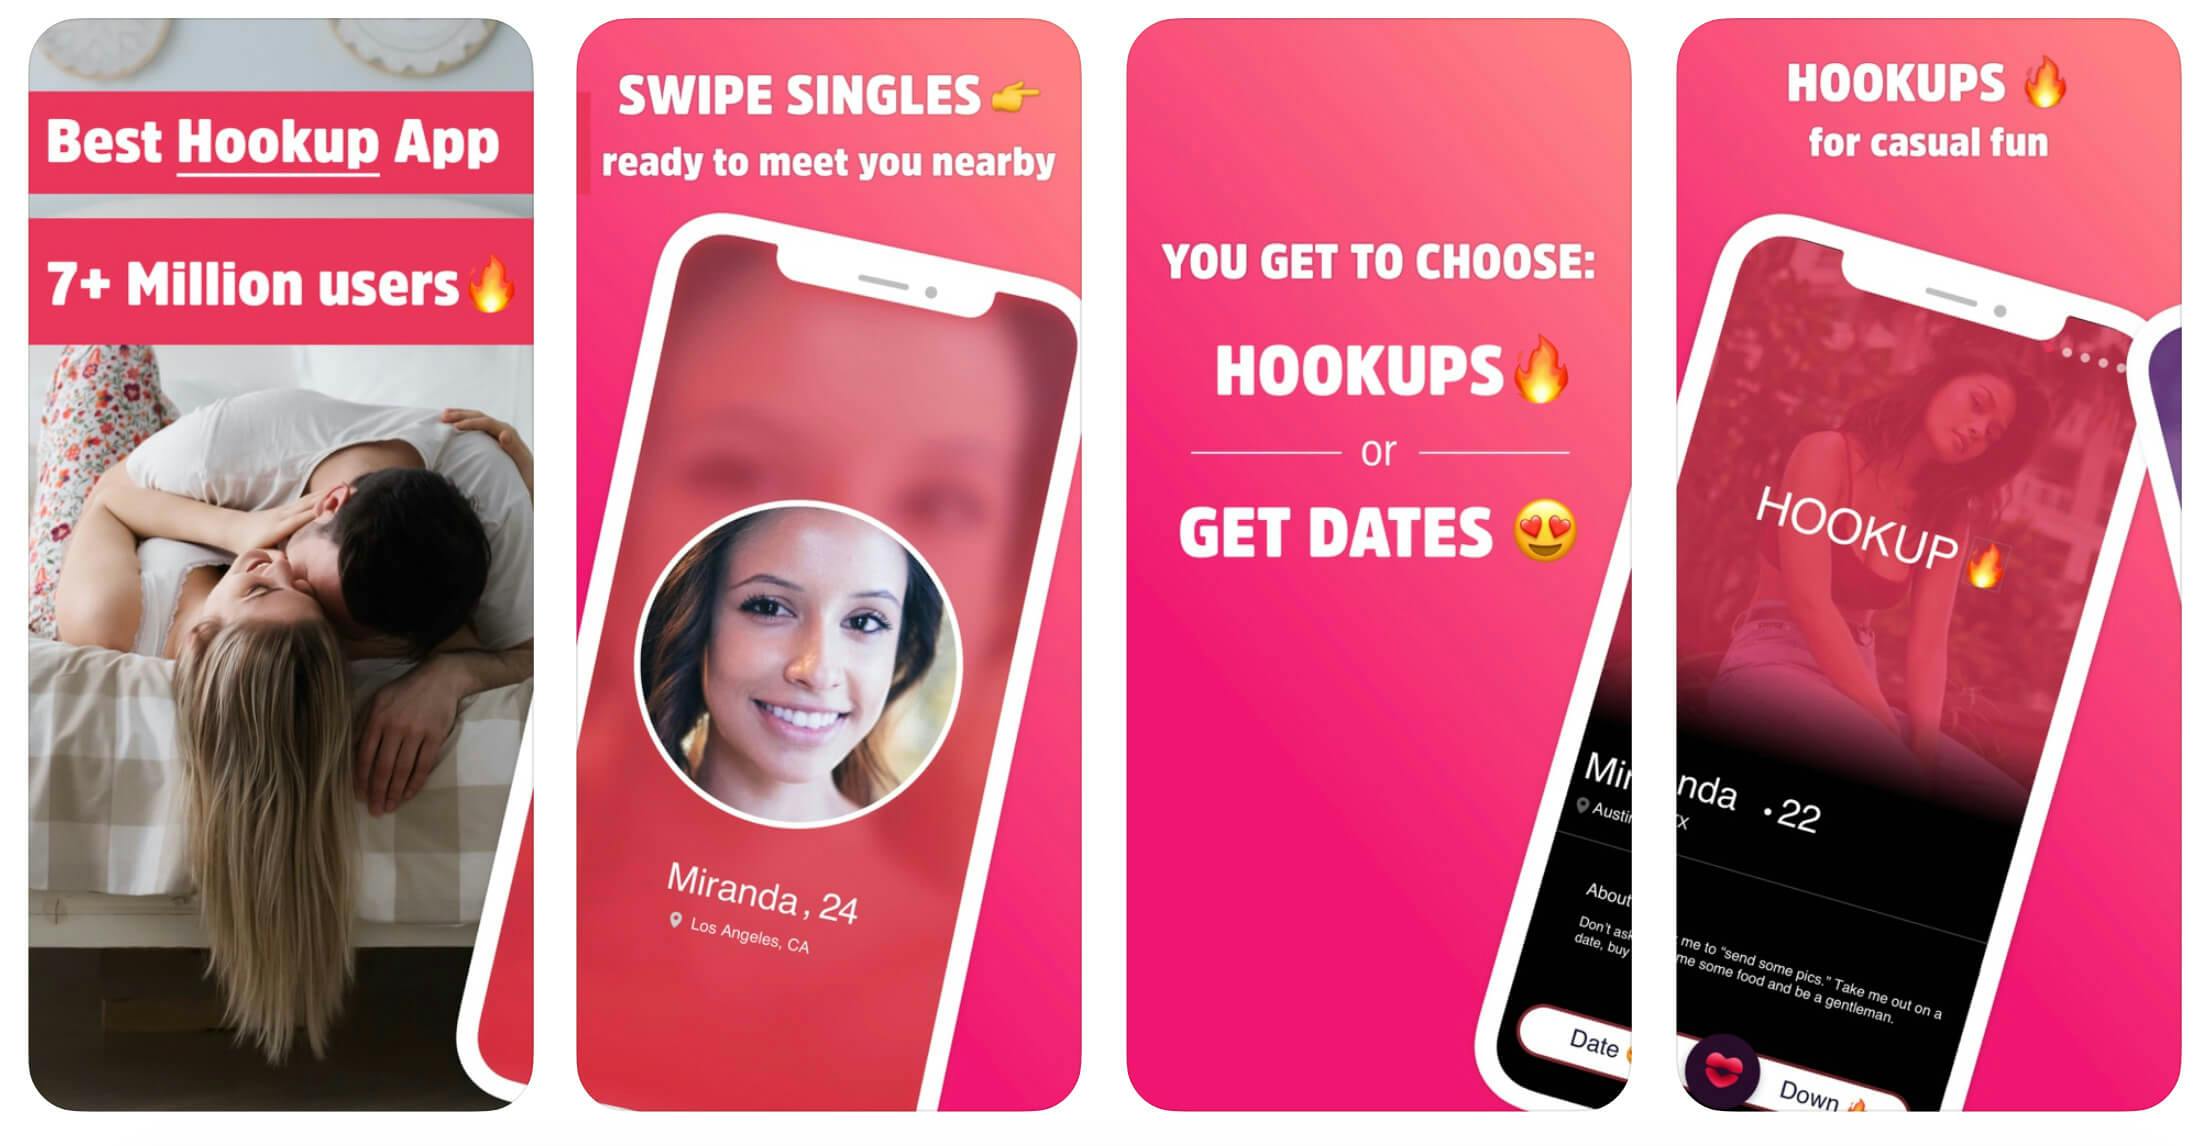 5 new dating apps (besides Tinder) worth trying